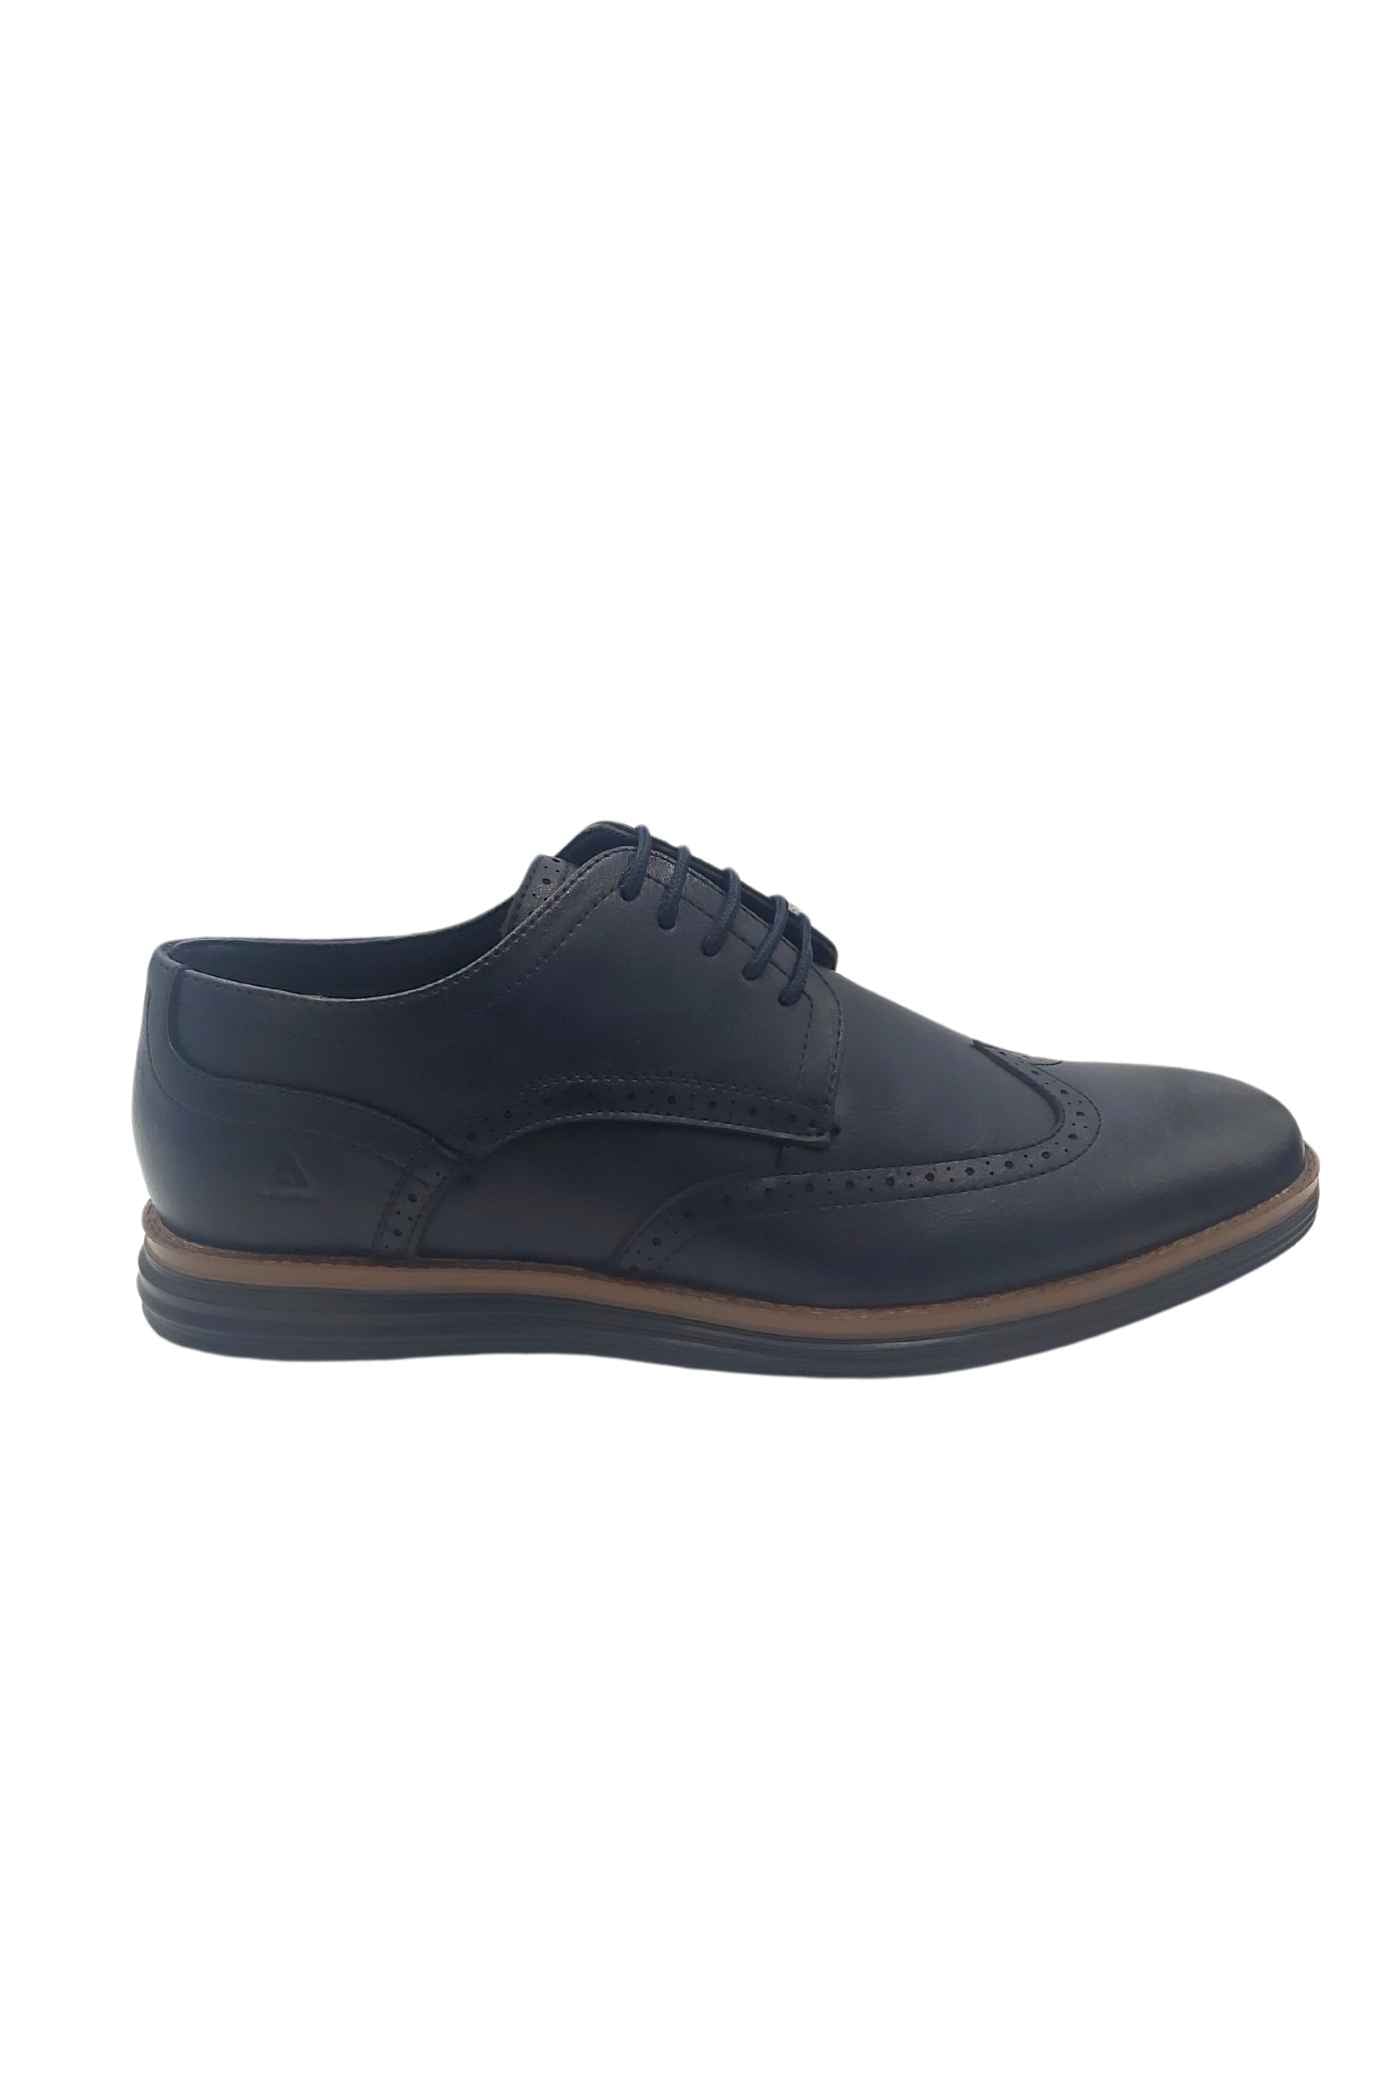 Greenpoint Navy Lace Shoe-Side view